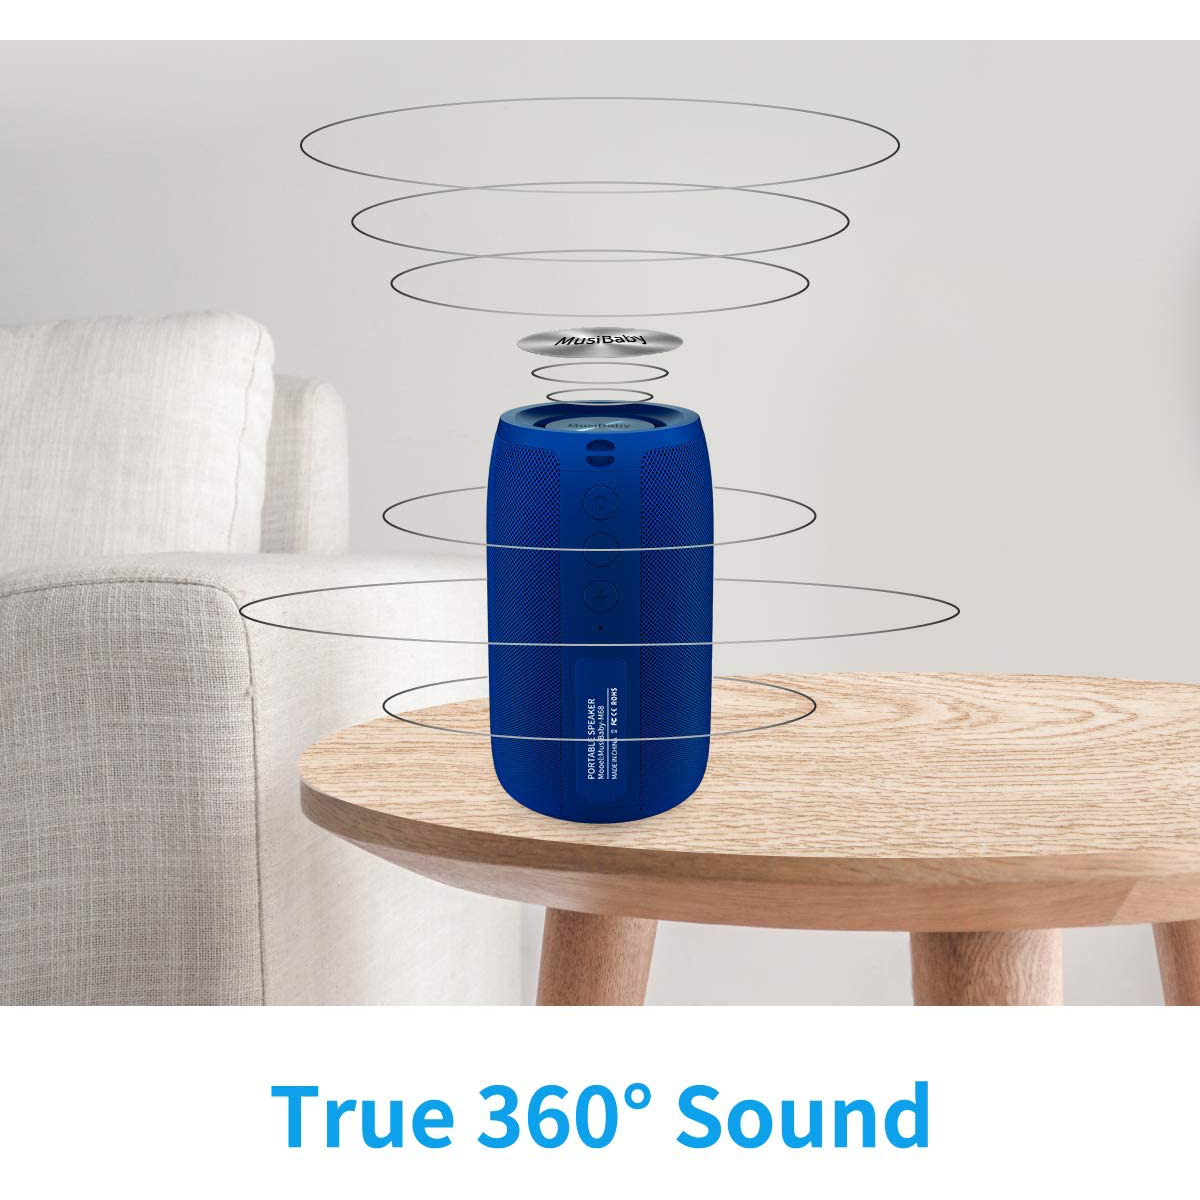 Bluetooth Speakers,MusiBaby Speaker,Outdoor Portable,Waterproof,Wireless Speakers,Dual Pairing,Bluetooth 5.0,Loud Stereo Booming Bass,1500 Mins Playtime for Home&Party Blue